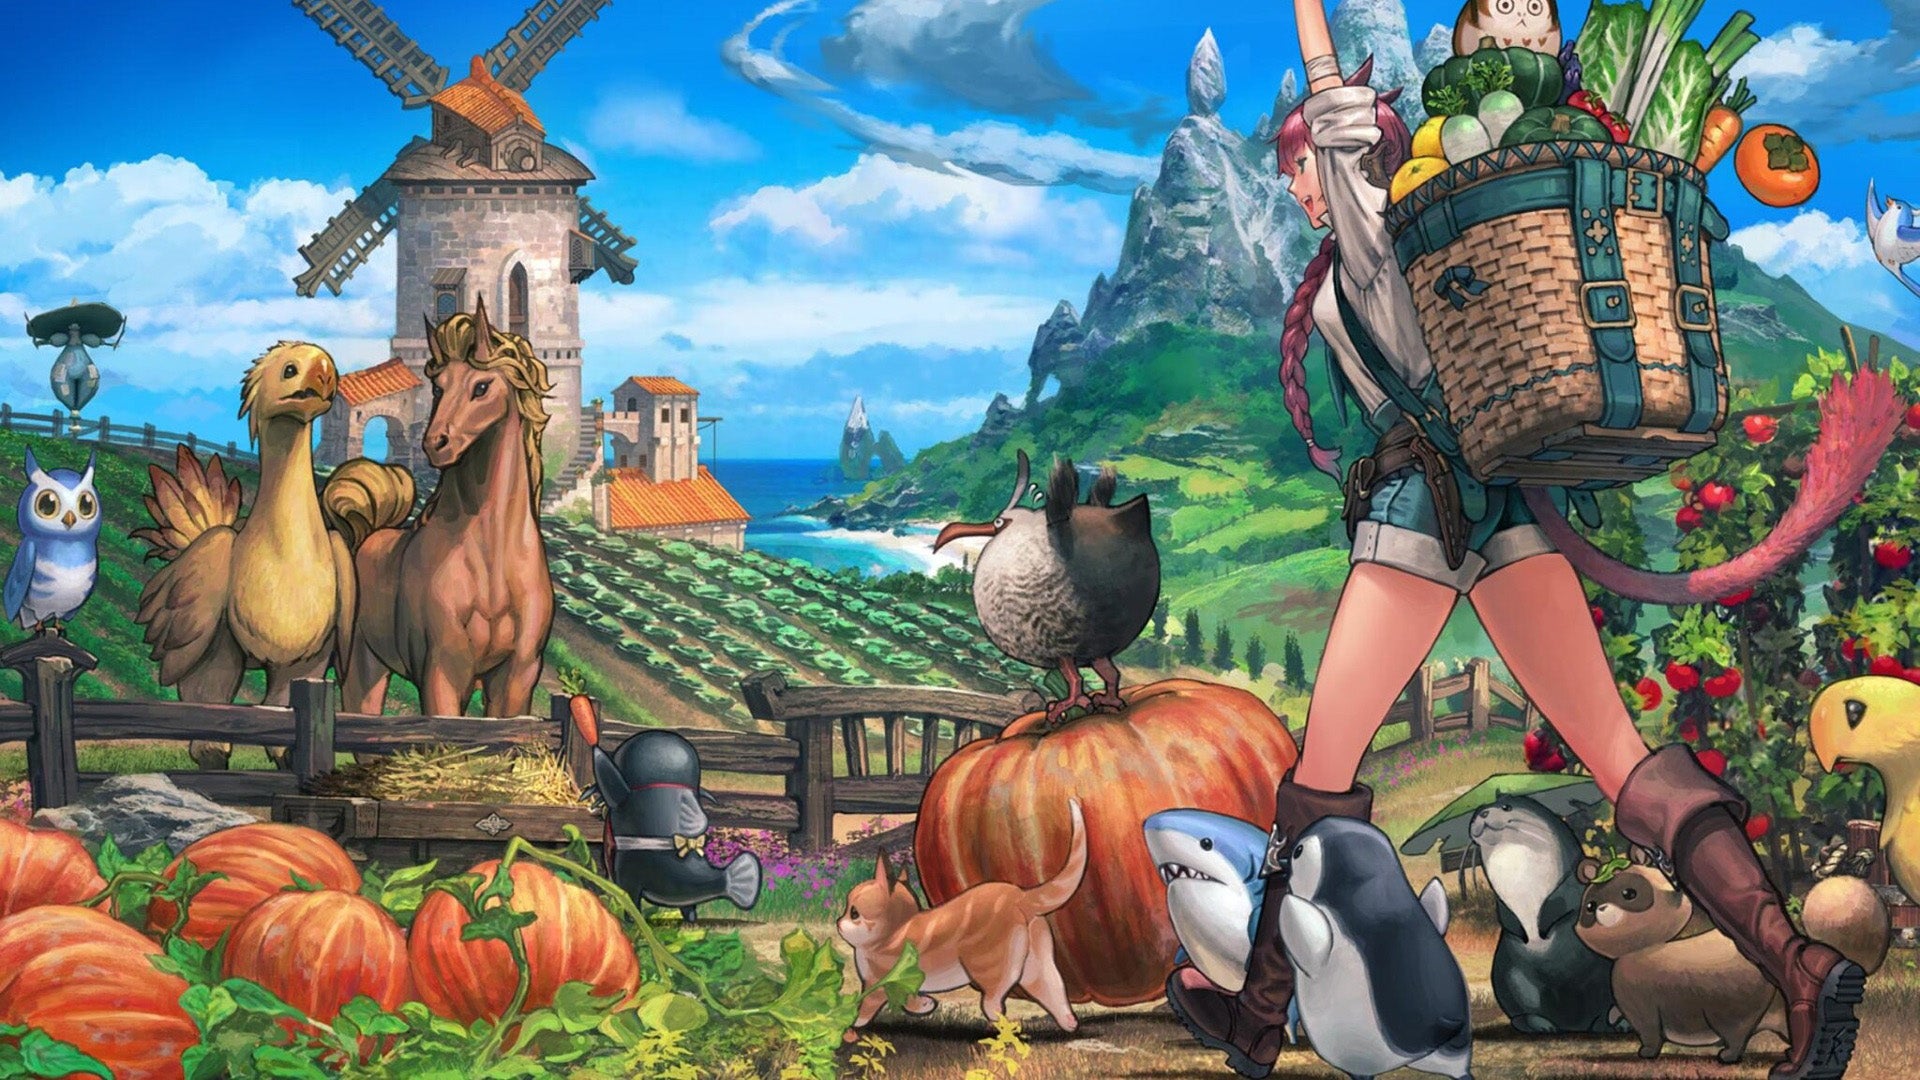 Final Fantasy 14 key art showing a warrior of light on a farm with various vegetables and animals surrounding them.